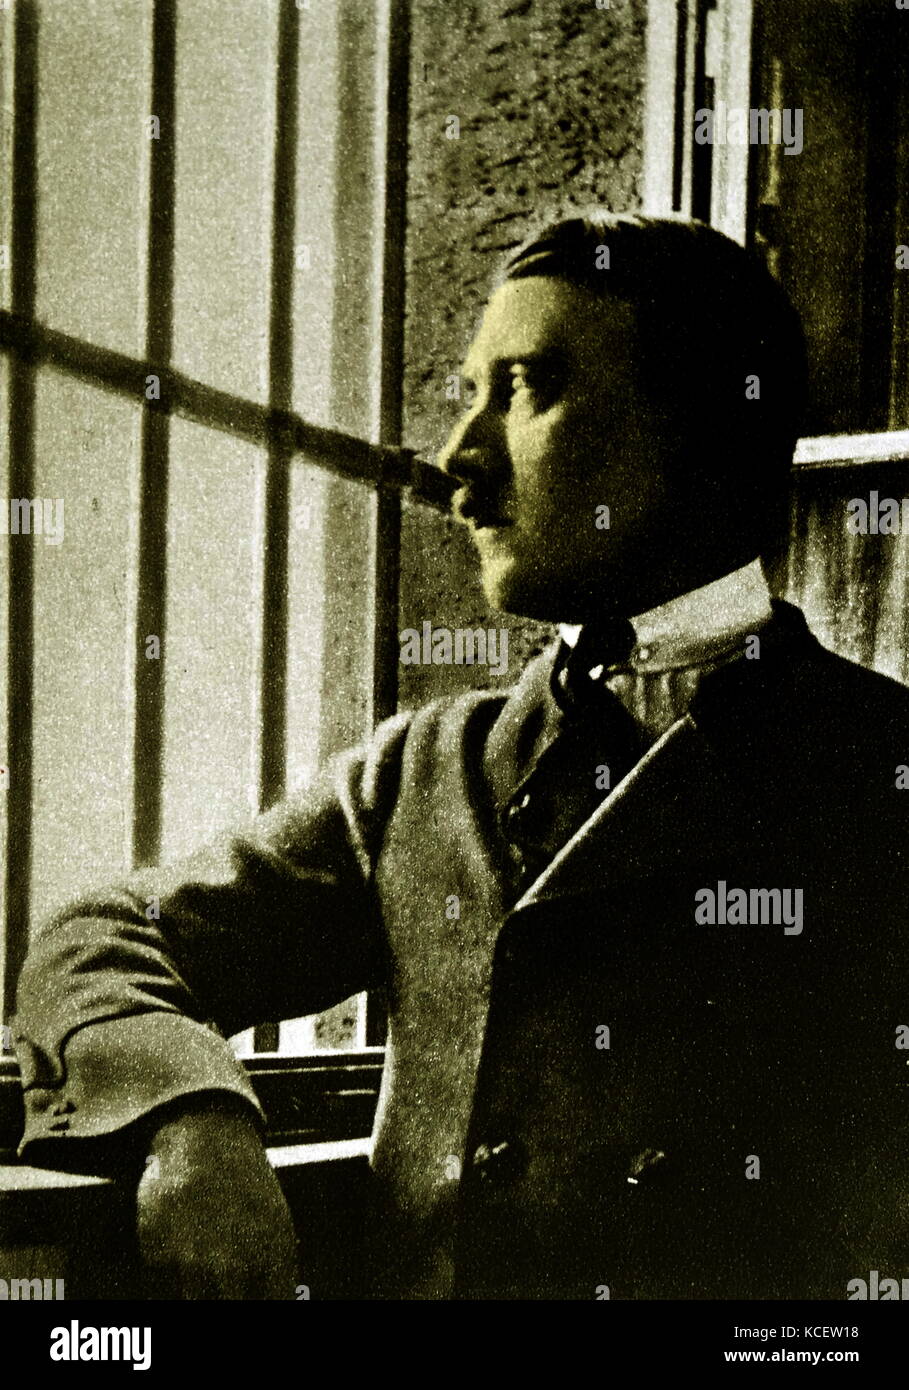 Adolf Hitler (1889-1945) looking out of the bars on the window to his prison cell at Landsberg Prison. In 1924 Adolf Hitler spent 264 days incarcerated in Landsberg after being convicted of treason following the Beer Hall Putsch in Munich the previous year. During his imprisonment, Hitler dictated and then wrote his book Mein Kampf with assistance from his deputy, Rudolf Hess. Stock Photo